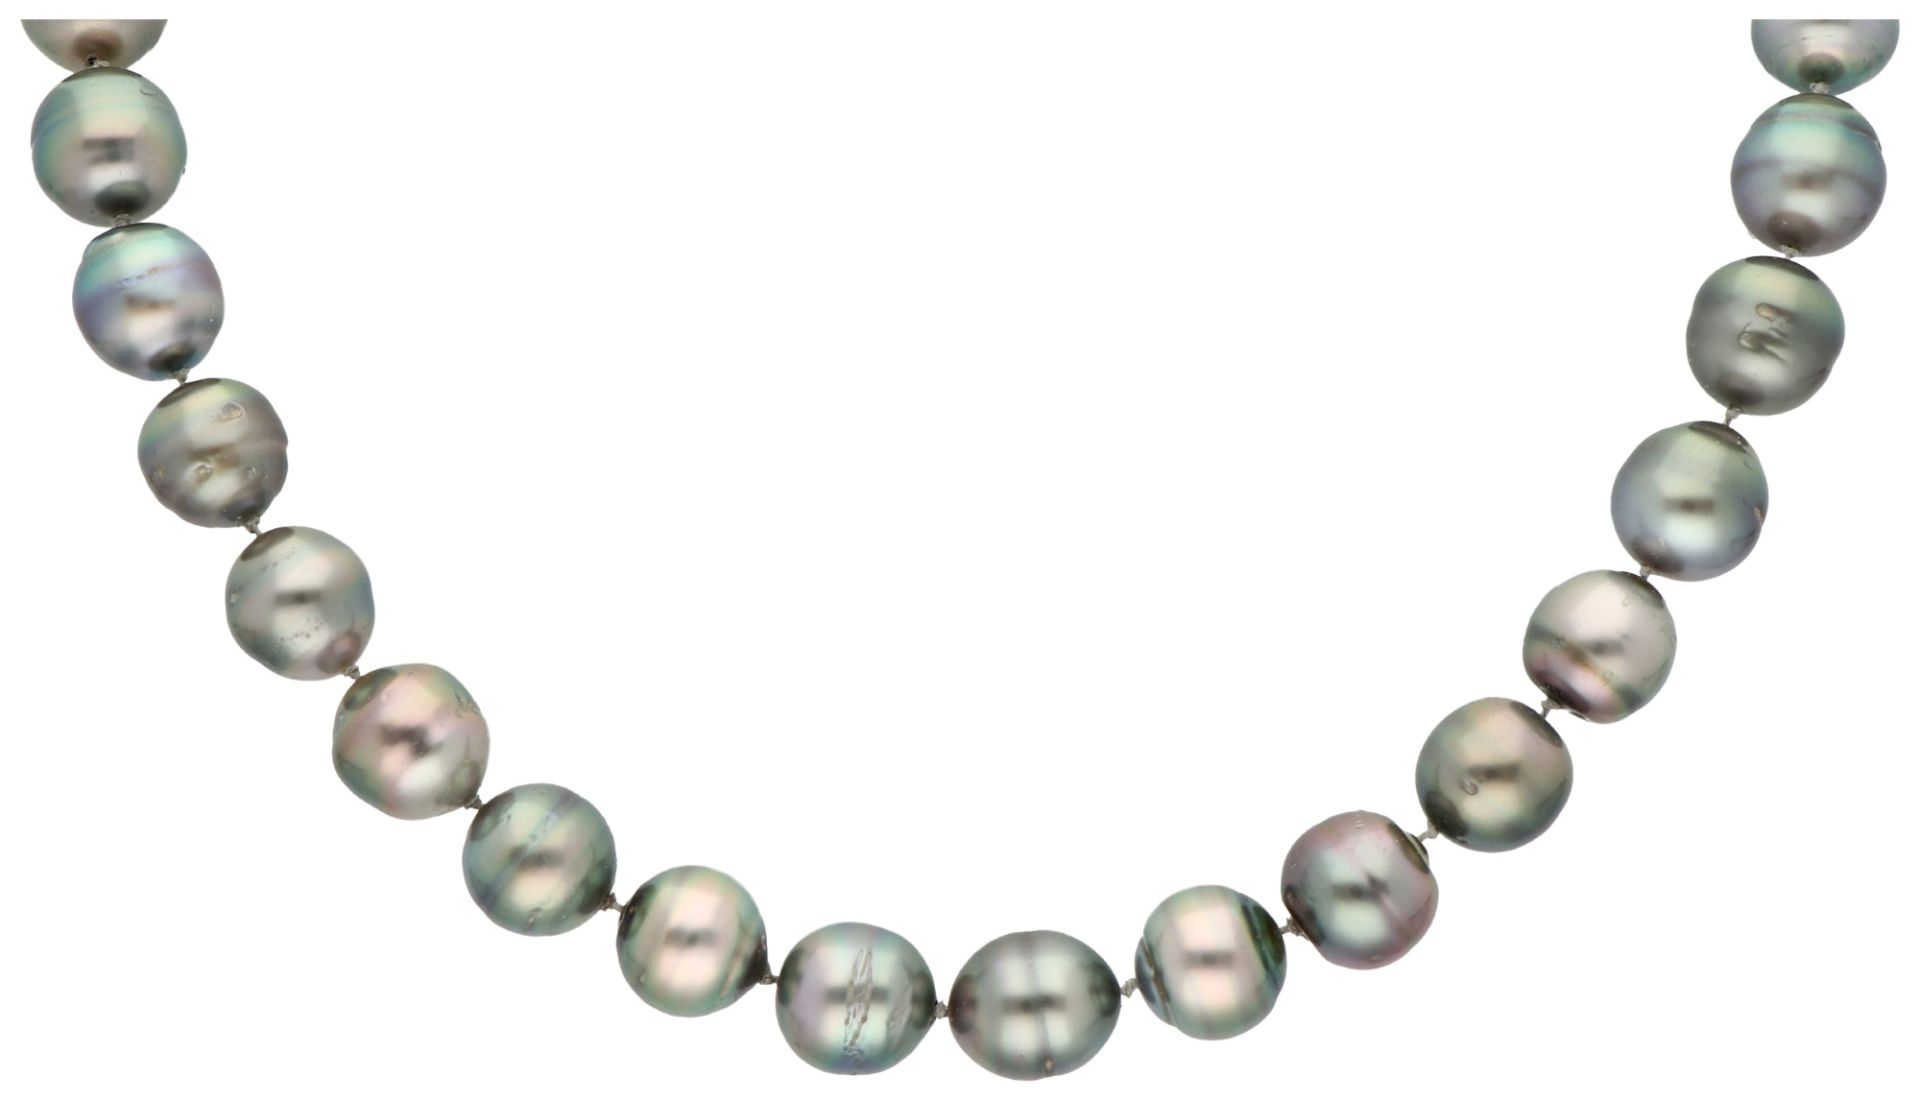 Tahiti pearl necklace with 18K white gold ball clasp. - Image 2 of 3